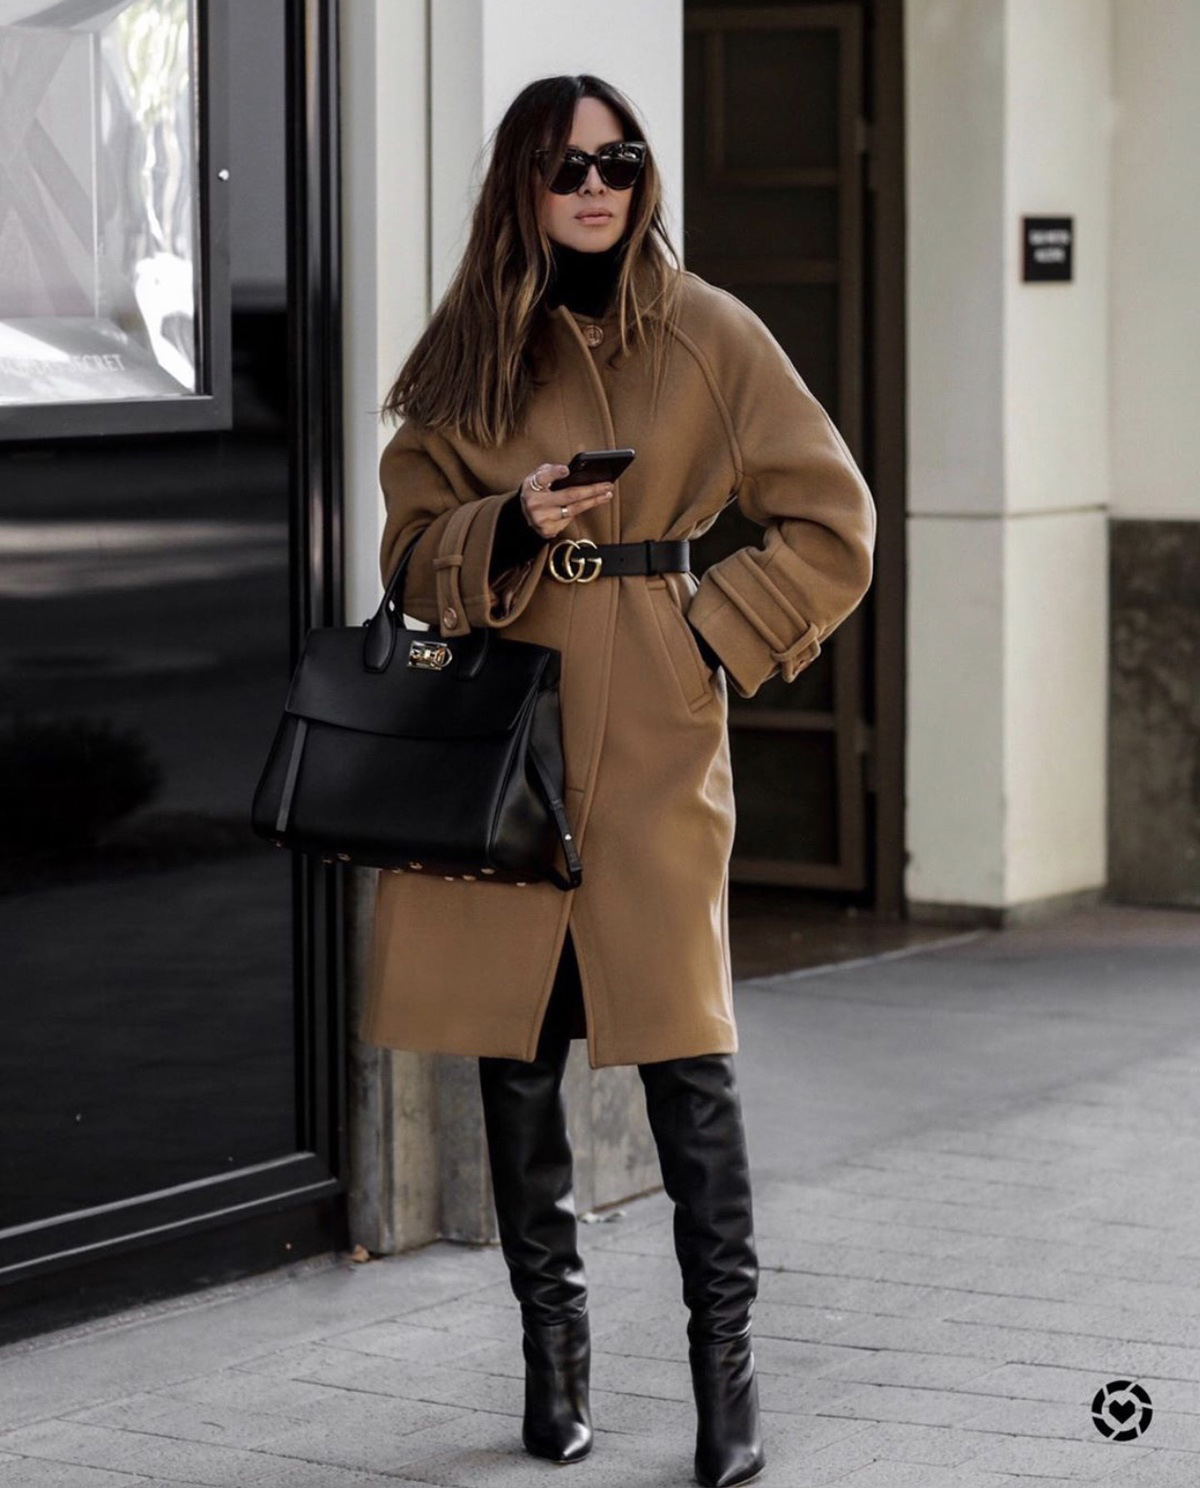 Coats Every Woman Should Own, belted camel coat, fall outfit inspiration by lolario style | lolariostyle.com